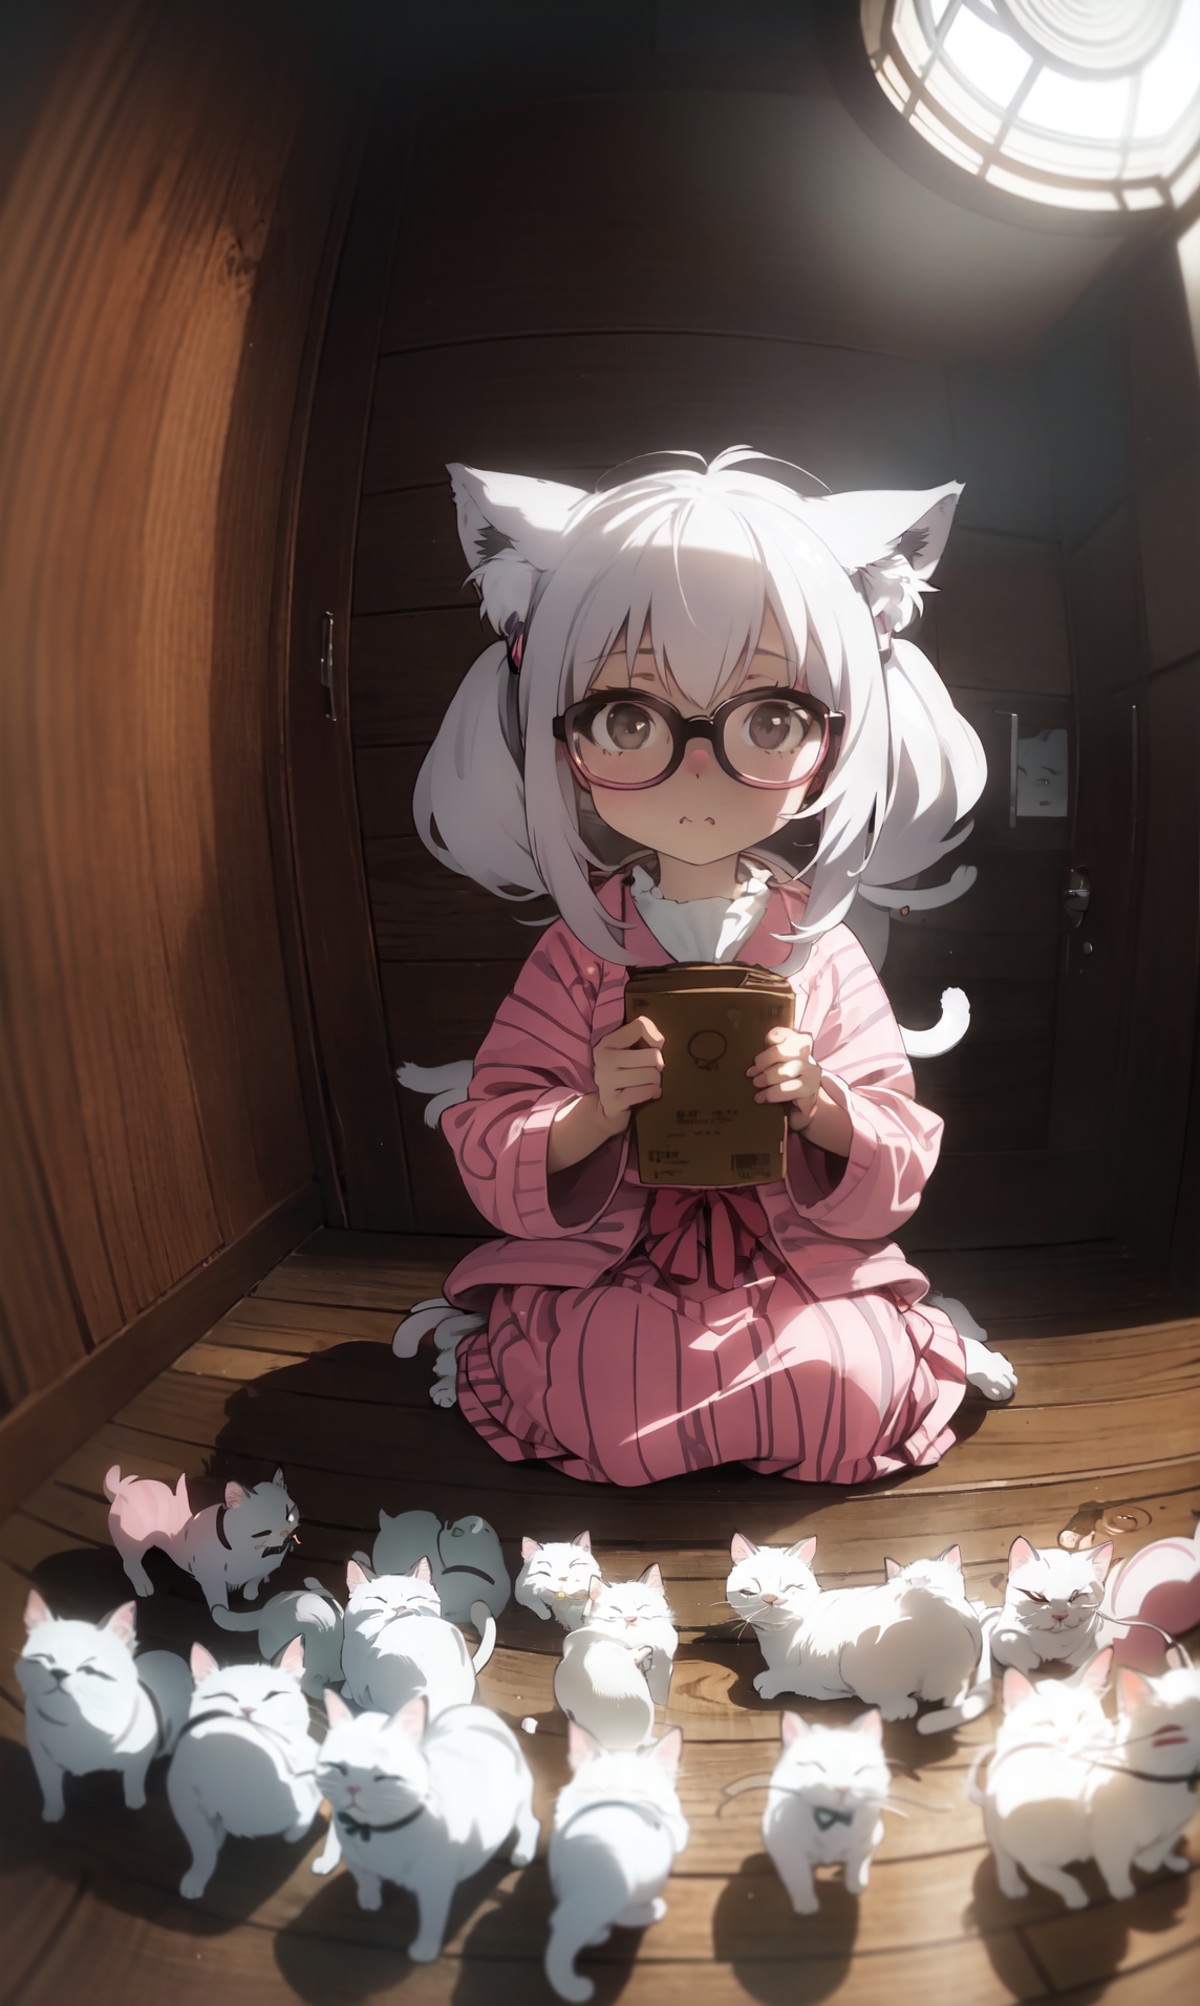 A girl with glasses, surrounded by many white cats, barroco, anime aesthetic, cats fill the picture, Cat lady, animal ear ...